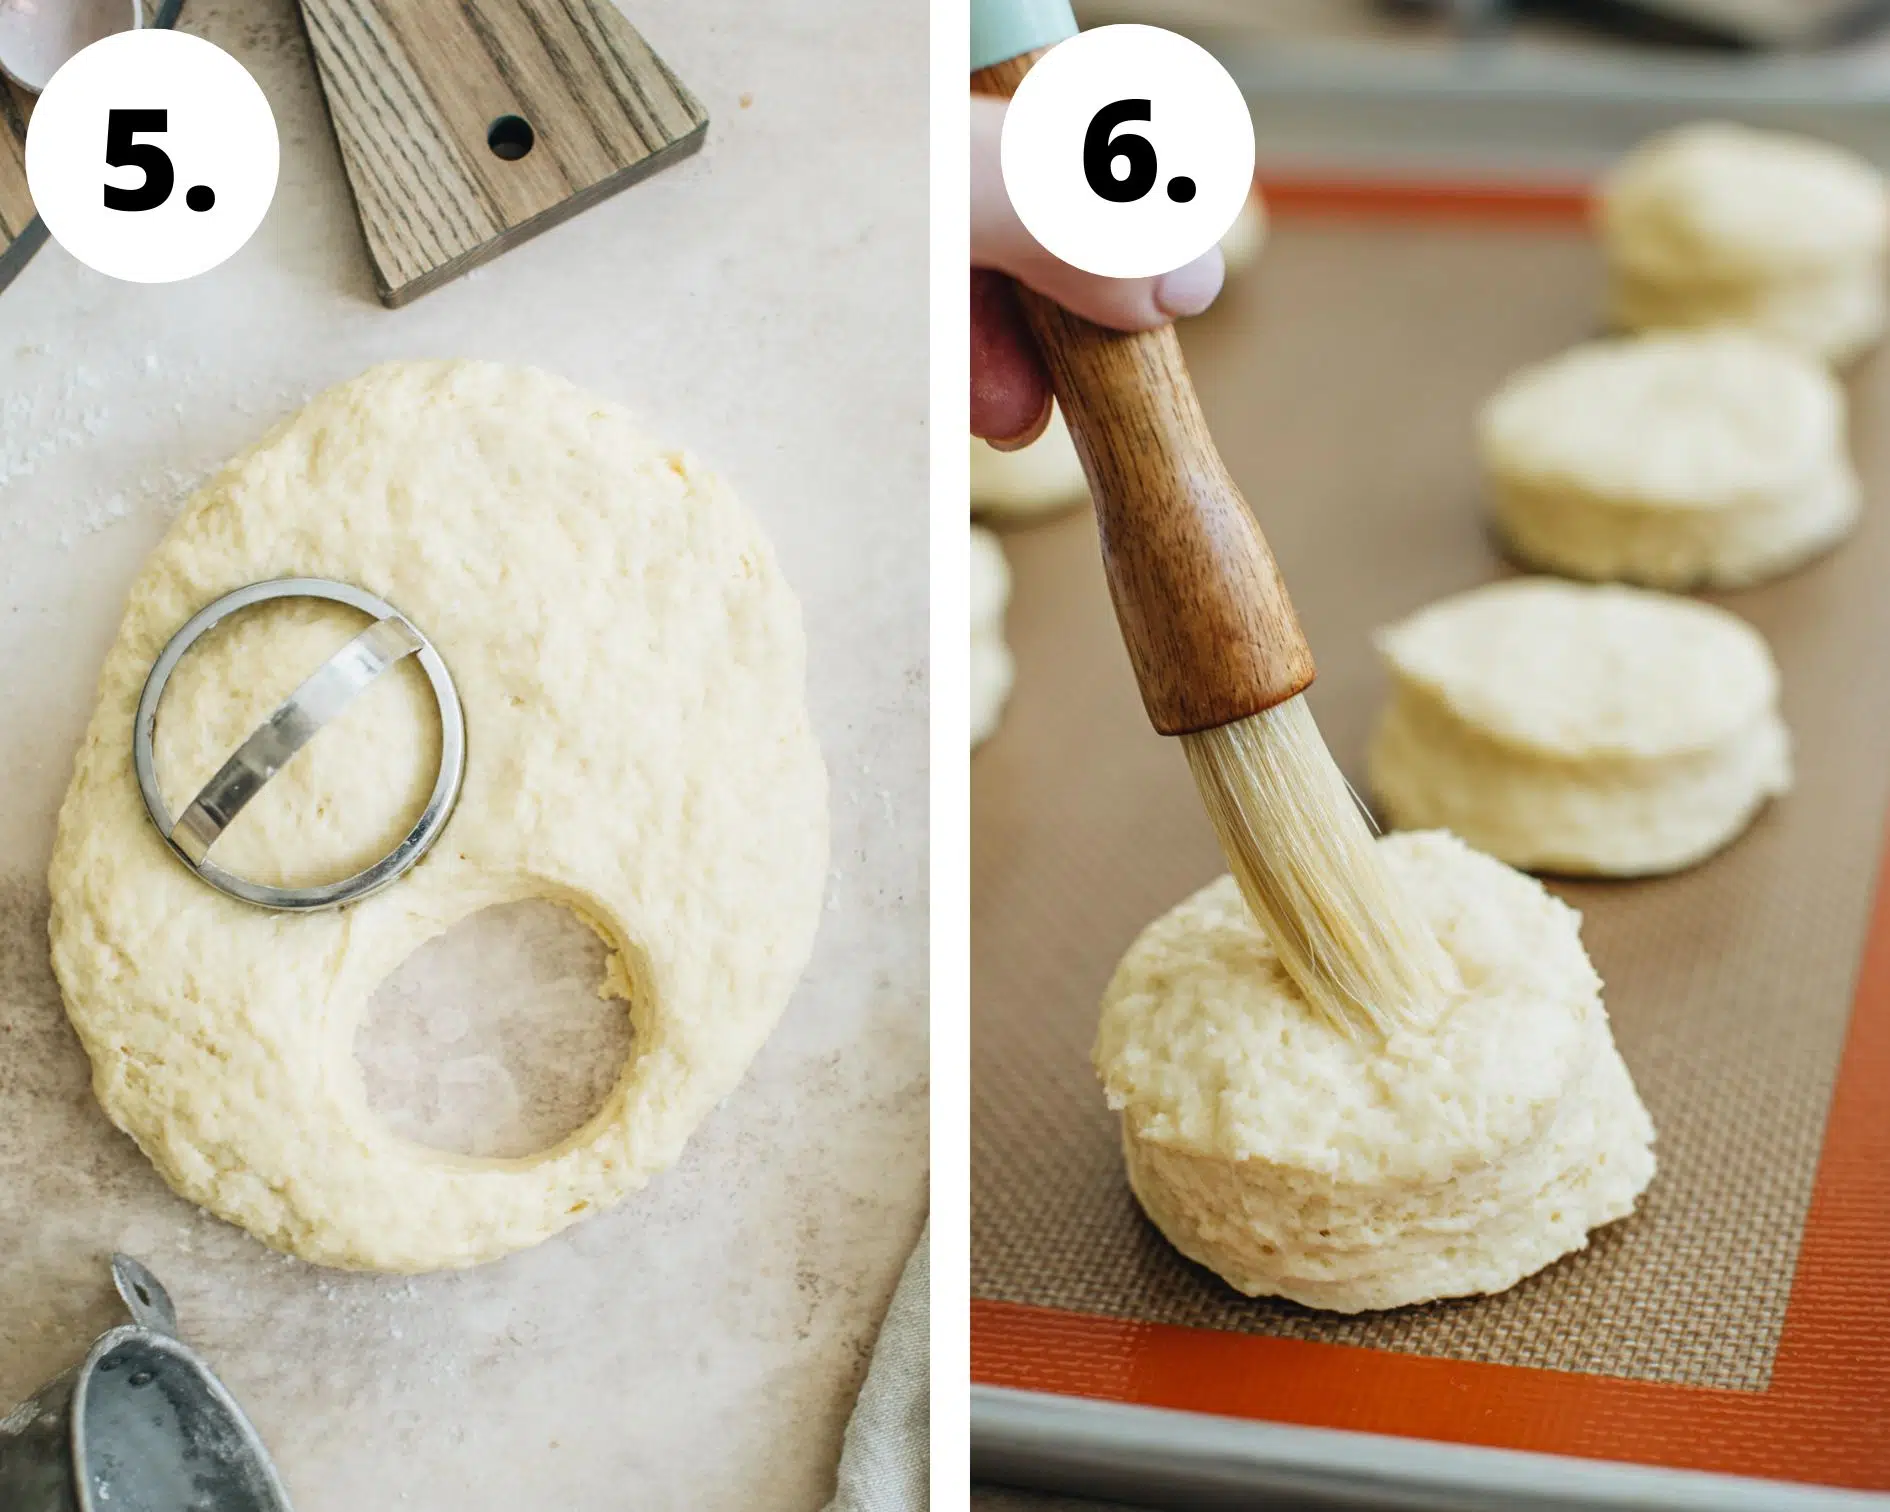 English scones recipe process steps 5 and 6.